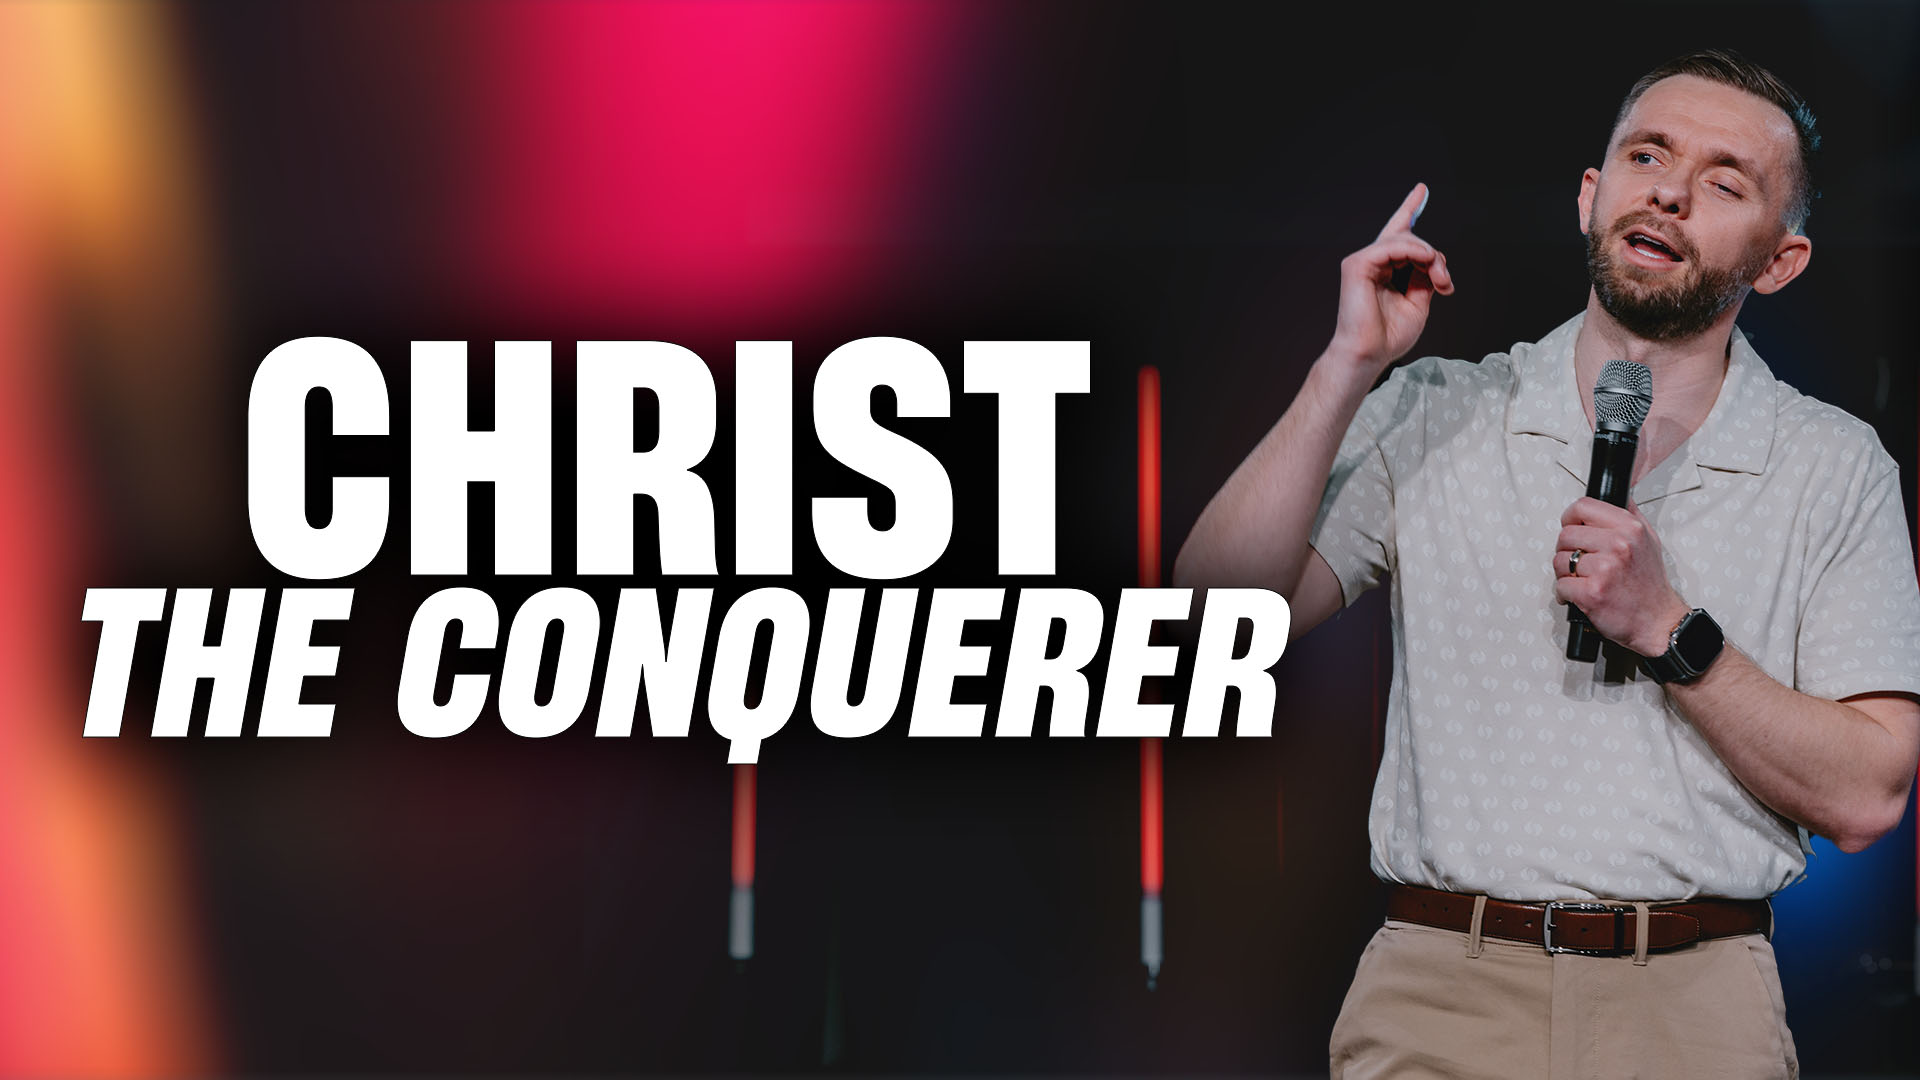 Featured Image for “Christ the Conquerer”